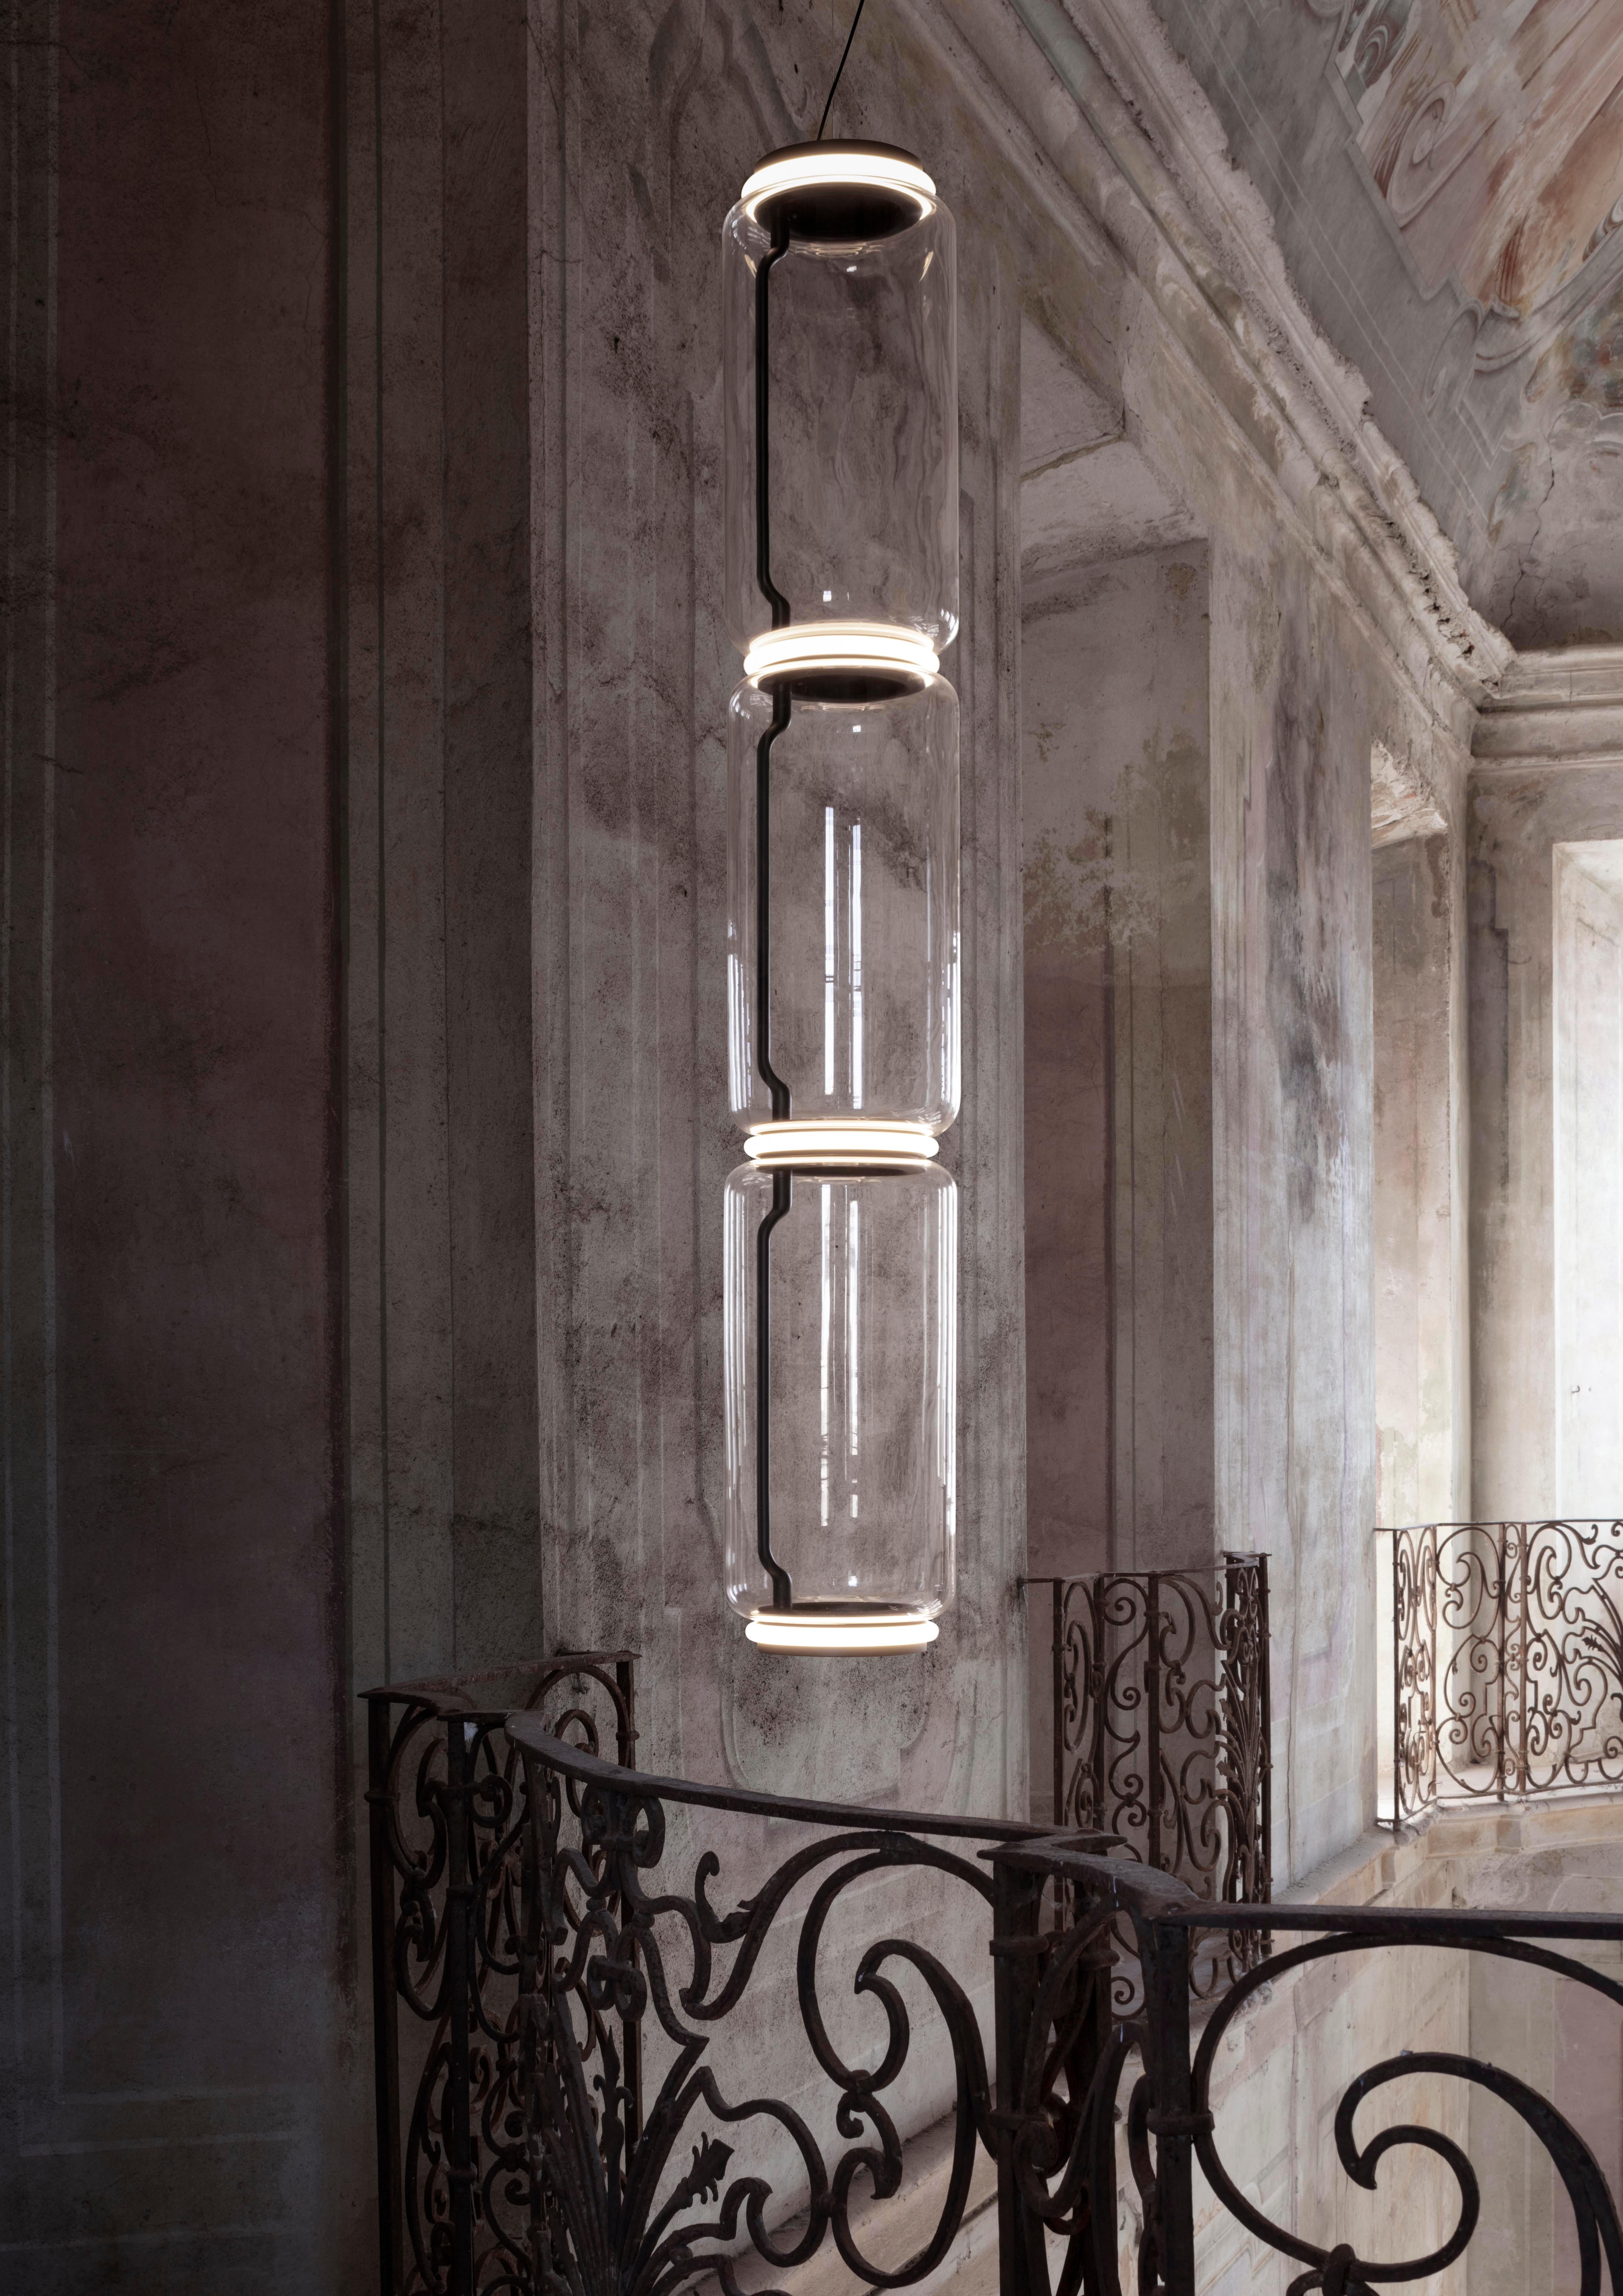 Another pioneering lighting design in the array of lamps and lighting fixtures Flos is known for, Noctambule LED dimmable pendant light with tall cylinders is one of designer Konstantin Grcic’s finest creations. Adaptable to any interior space, this